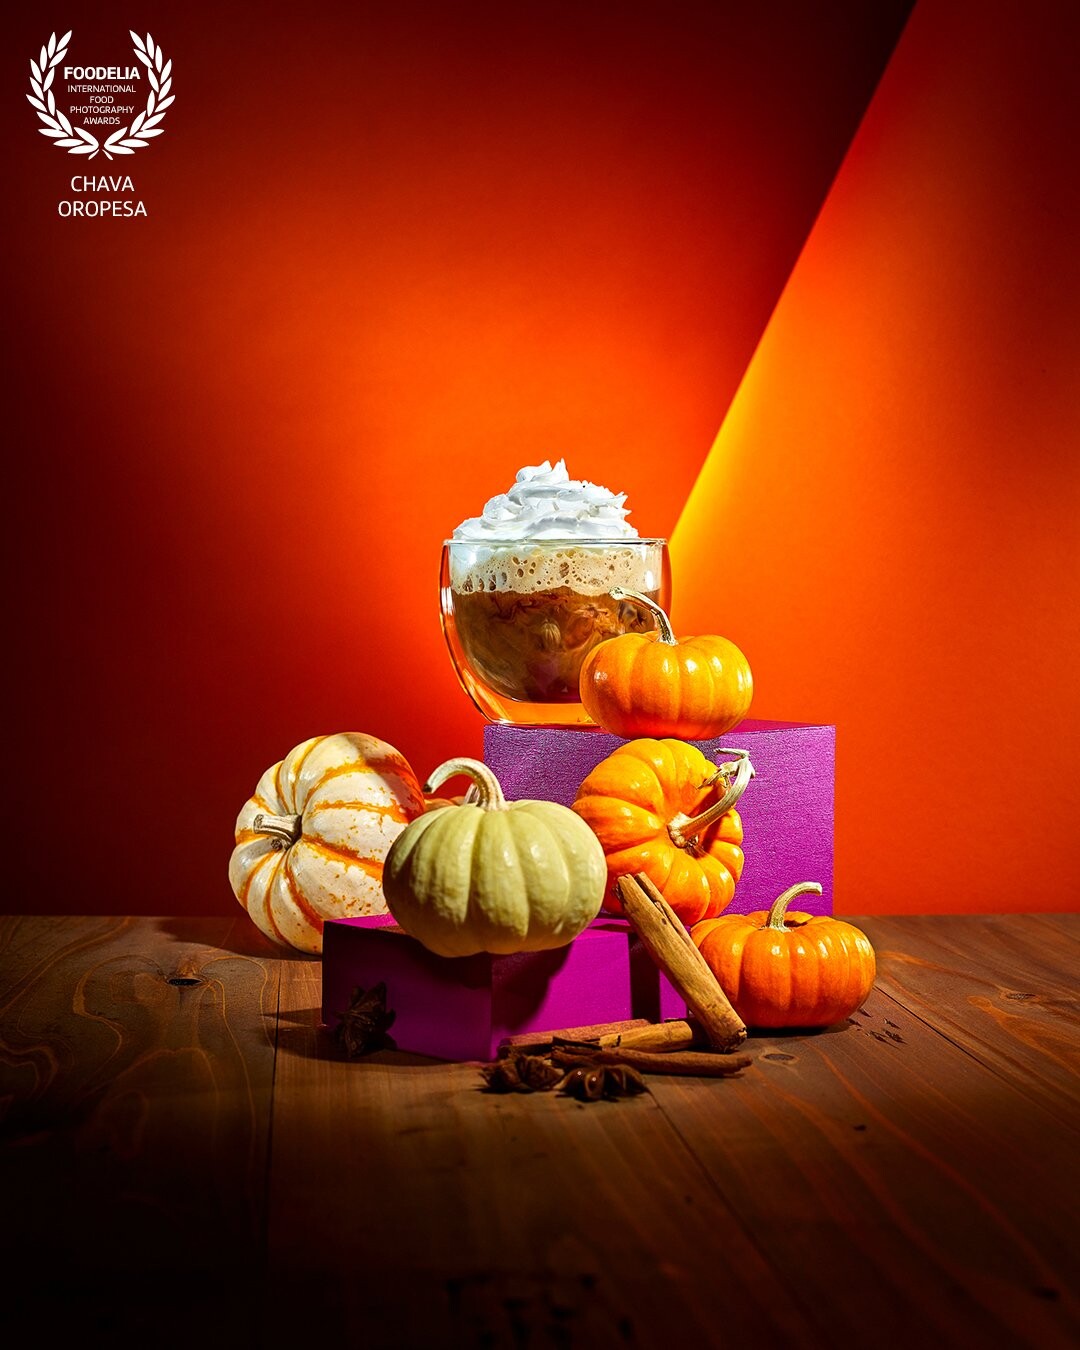 It’s the season that pumpkin takes over!<br />
<br />
It seems that everyone waits on pins and needles at the beginning of the Fall season for when the Pumpkin Spice Latte drops across most coffee brands and bakery shops.<br />
<br />
In preparation for this seasonal classic, I put together a shoot creating hero images featuring coffee drinks. Color backgrounds and warm wooden textures help convey the message. I also wanted to use prop elements that brought a different color palette to the classic orange and brown Fall colors. Introducing the purple props makes the image more contrast and adds visual interest.